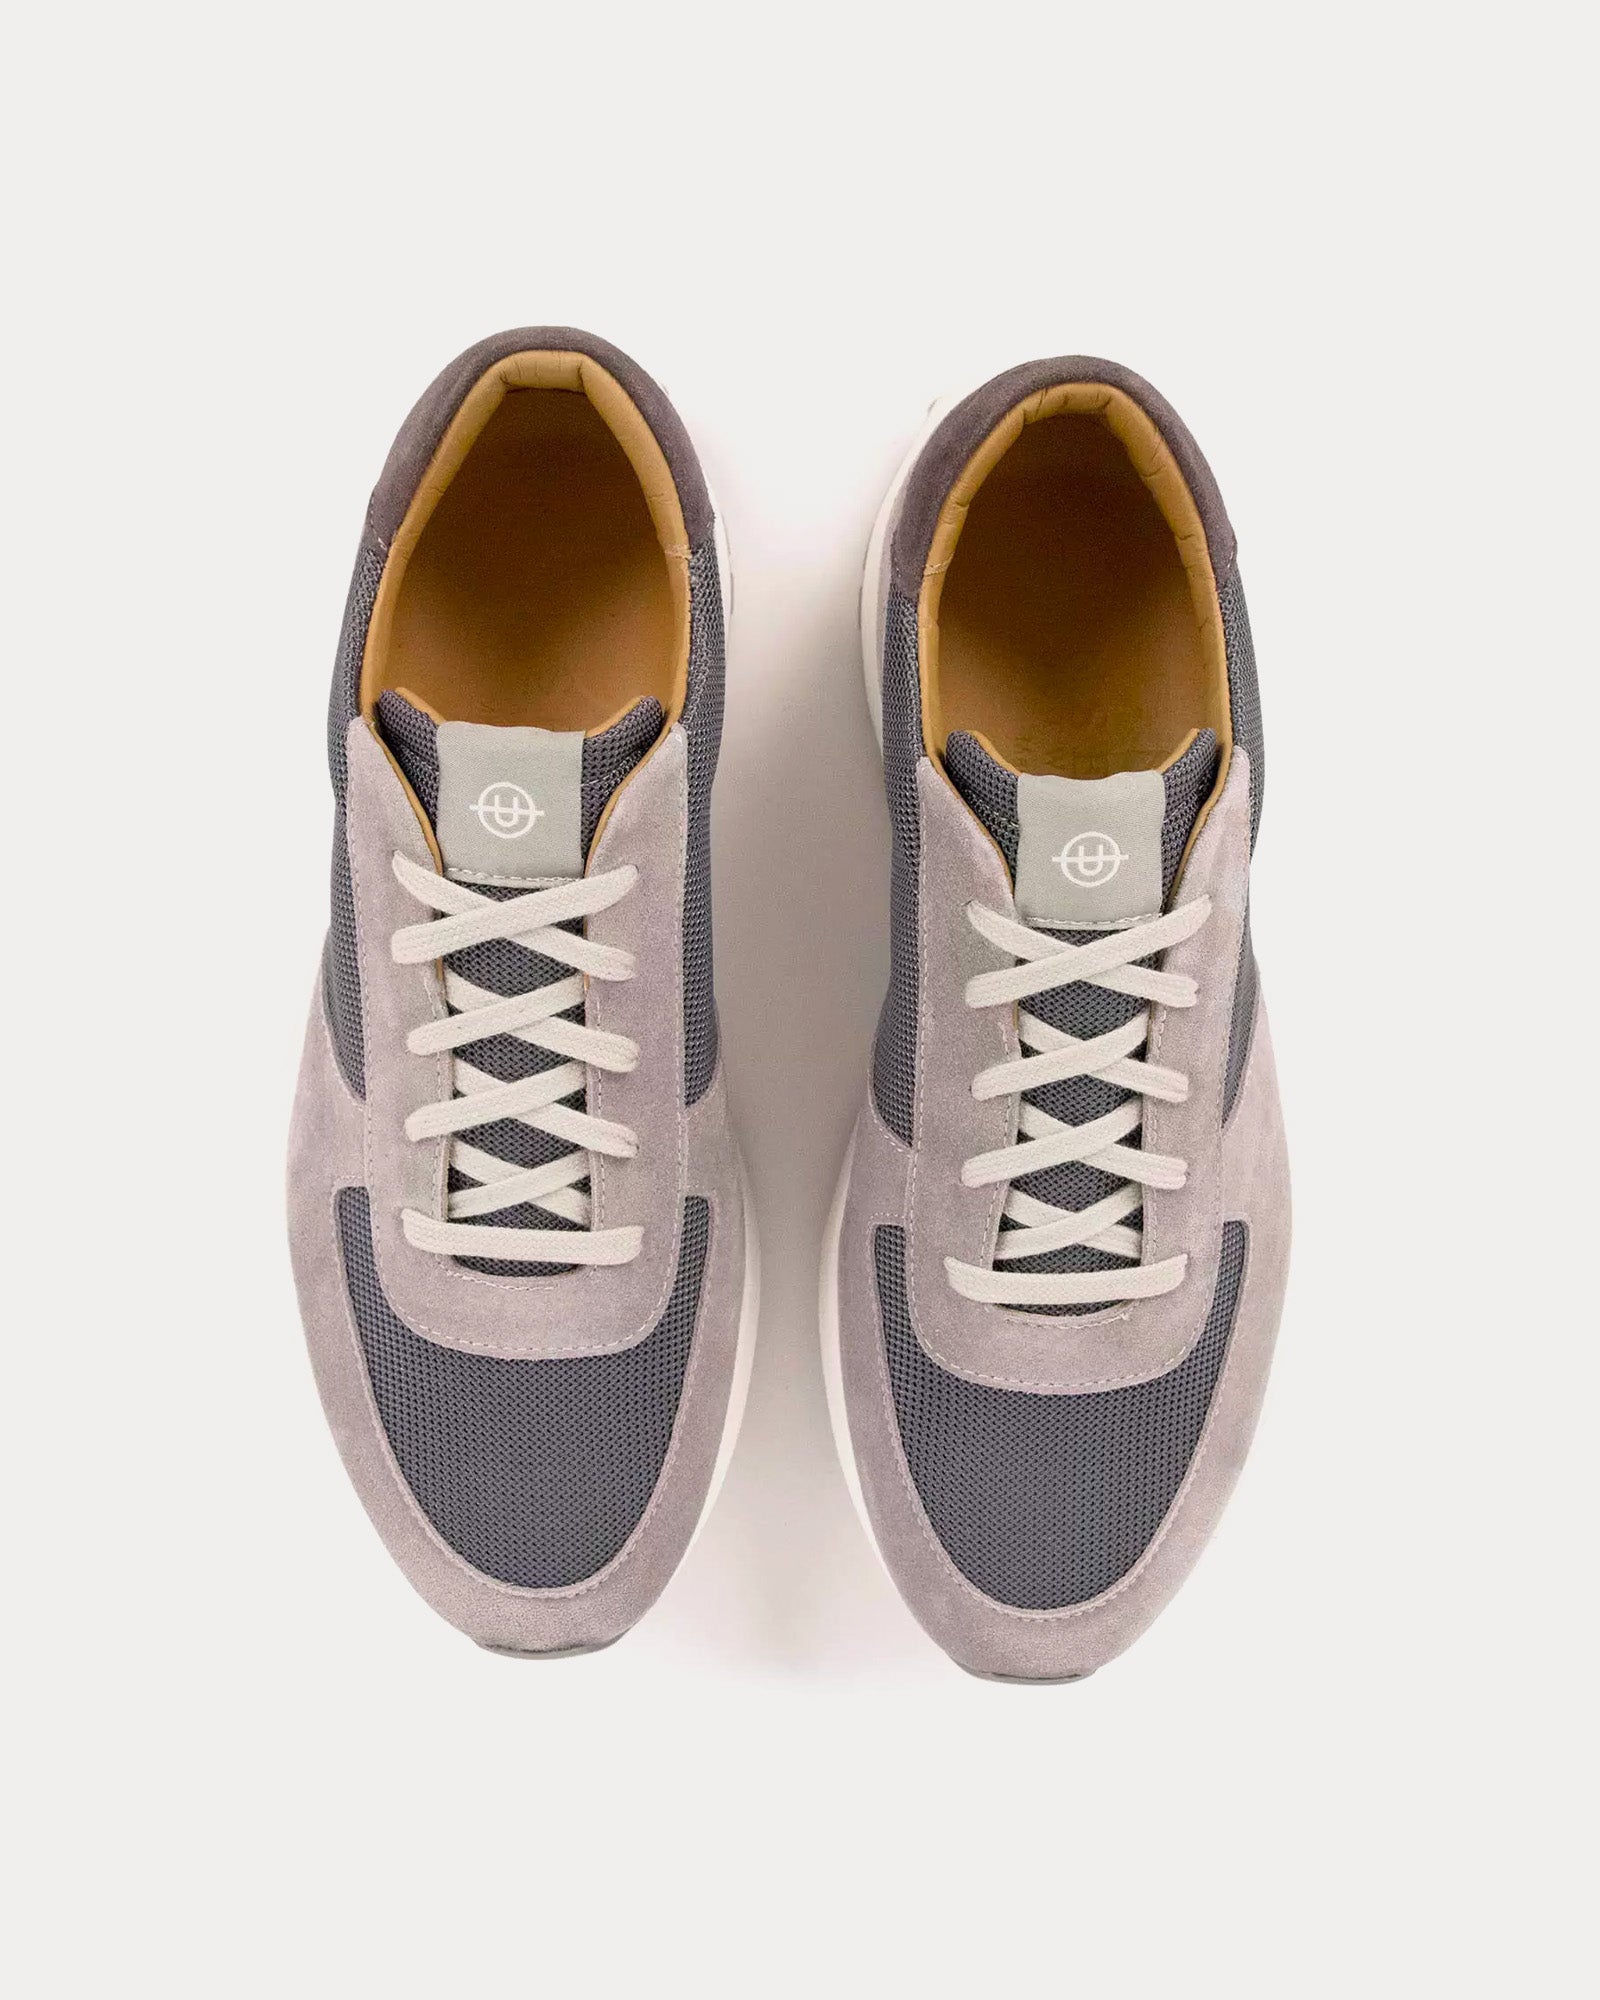 Unseen Footwear - Trinity Luxe Suede Charcoal Grey / White Low Top Sneakers